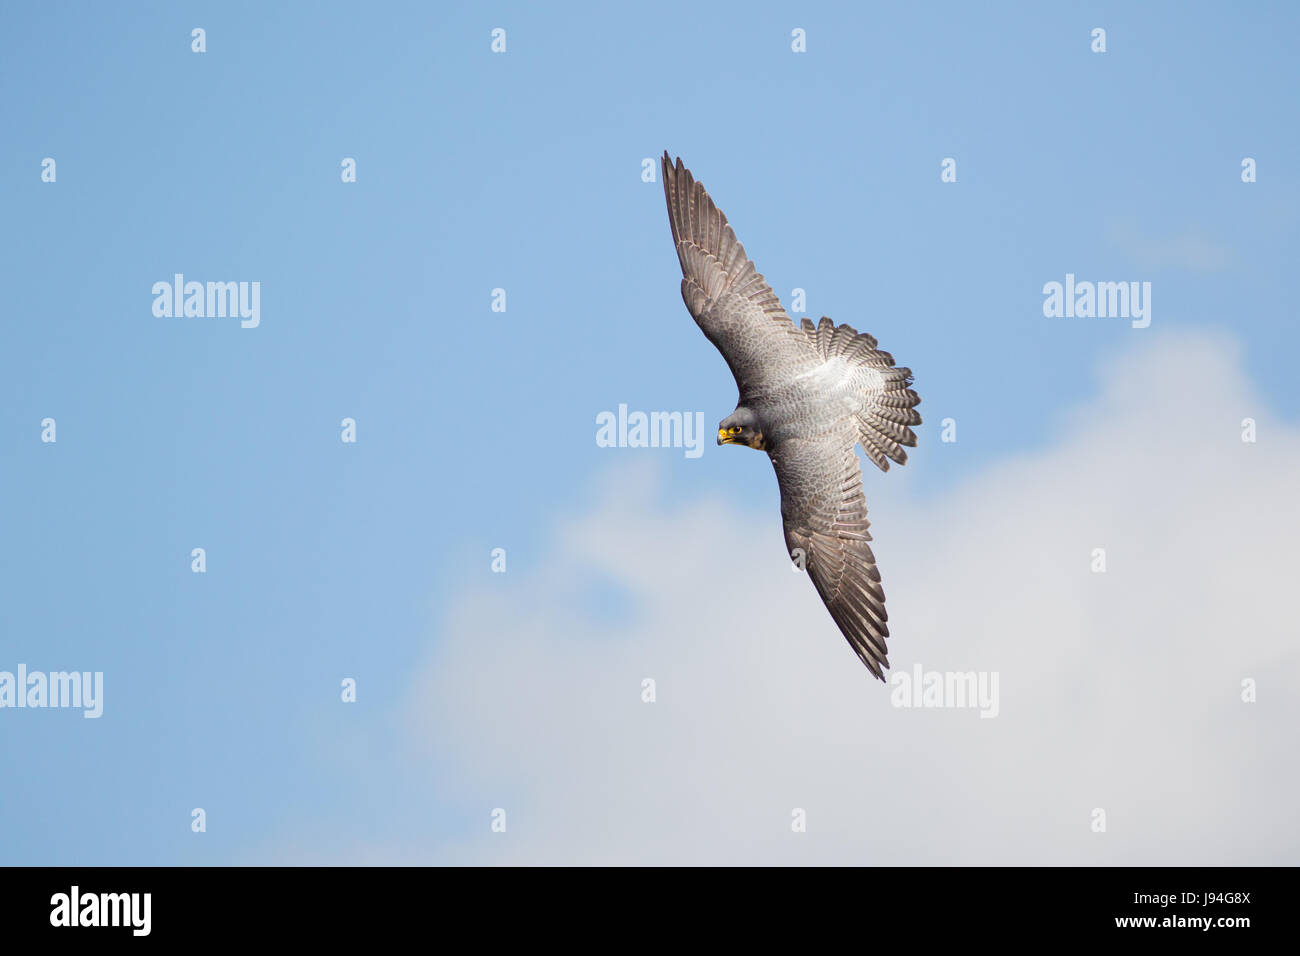 Top view of Peregrine falcon (Falco peregrinus) banking flying against blue cloudy sky Stock Photo